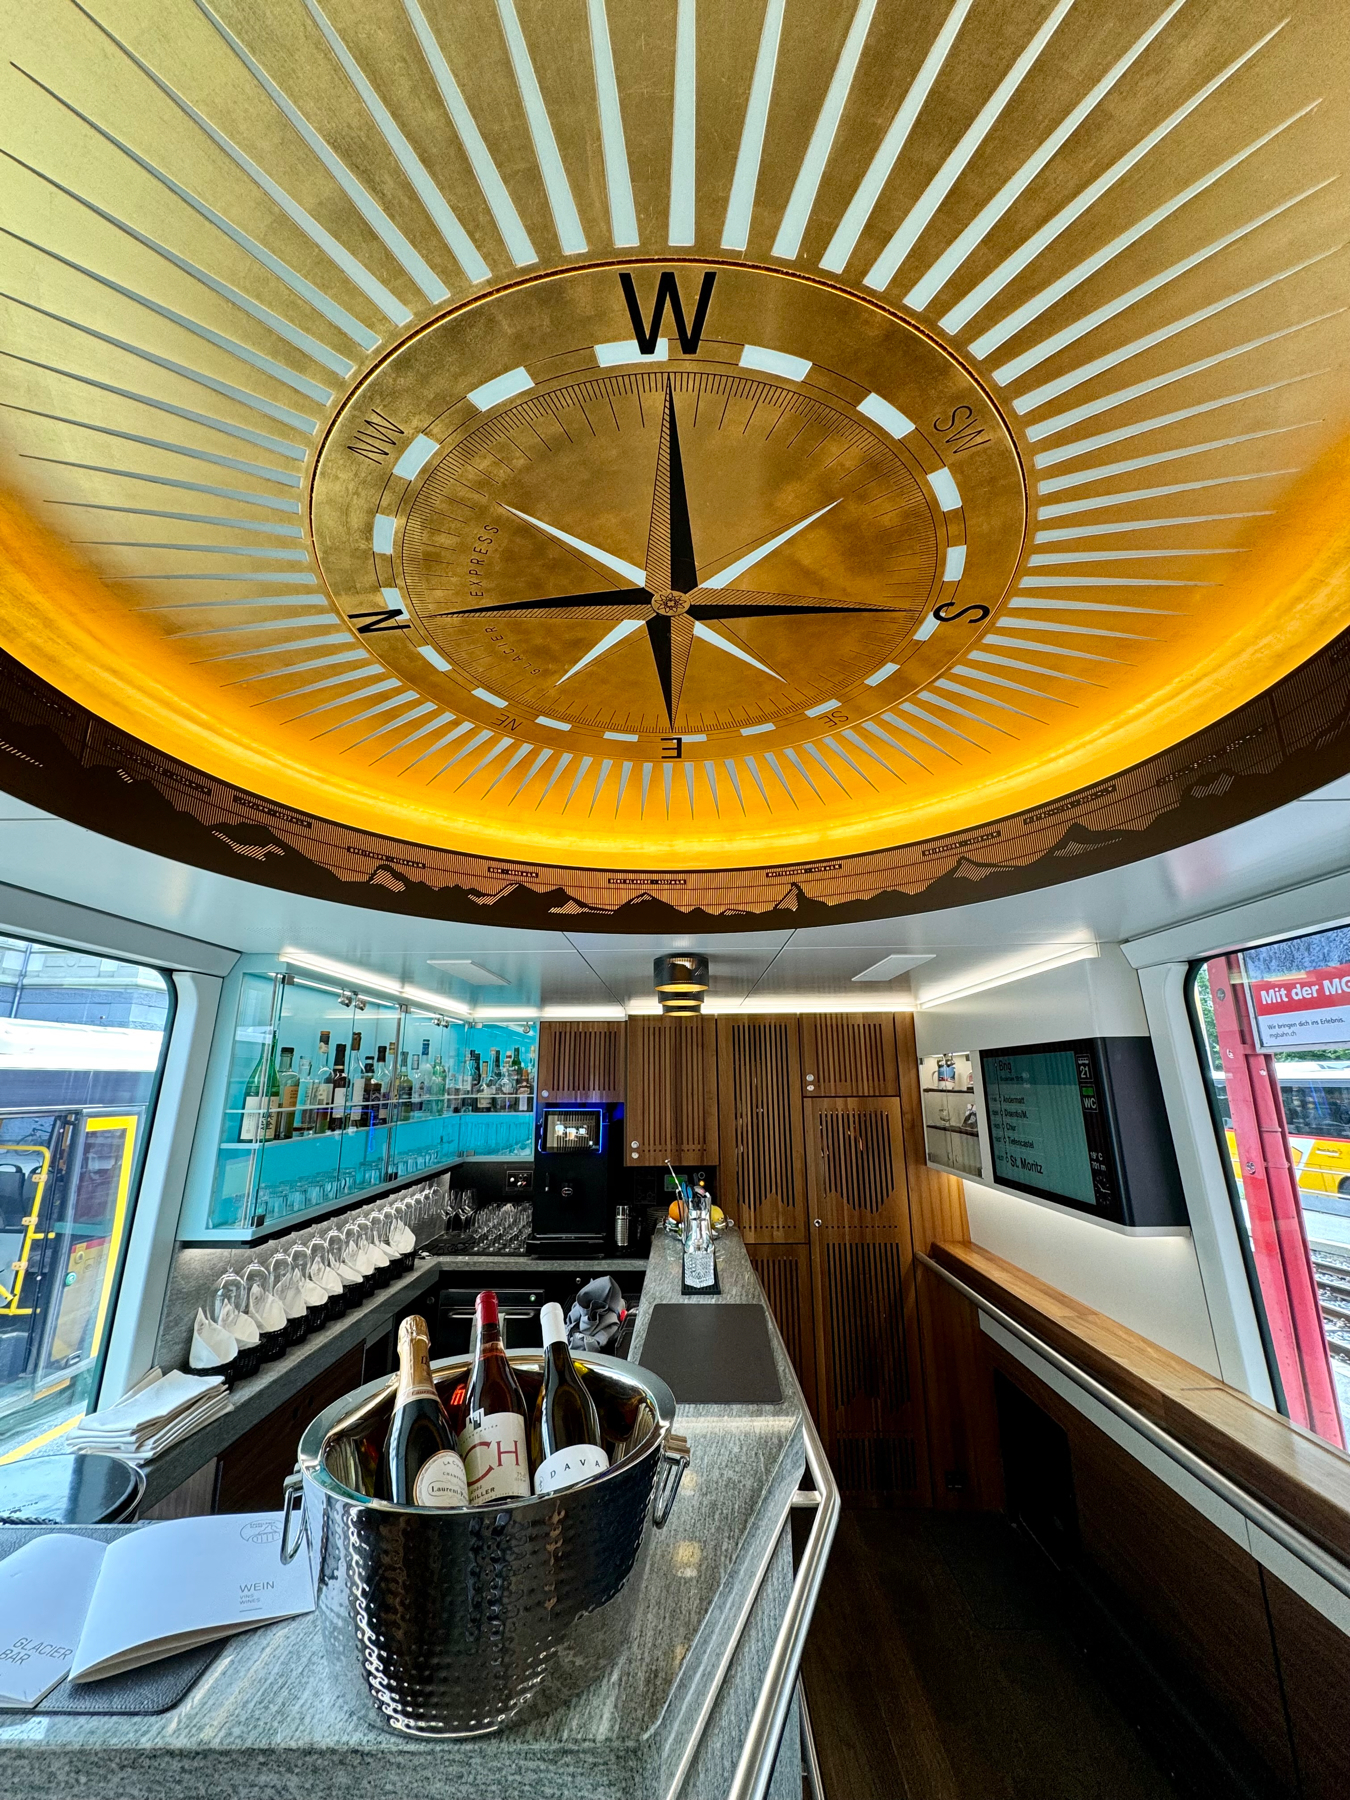 A train bar carriage with a compass rose on the ceiling, a counter with bottles, and a window showing another train outside.